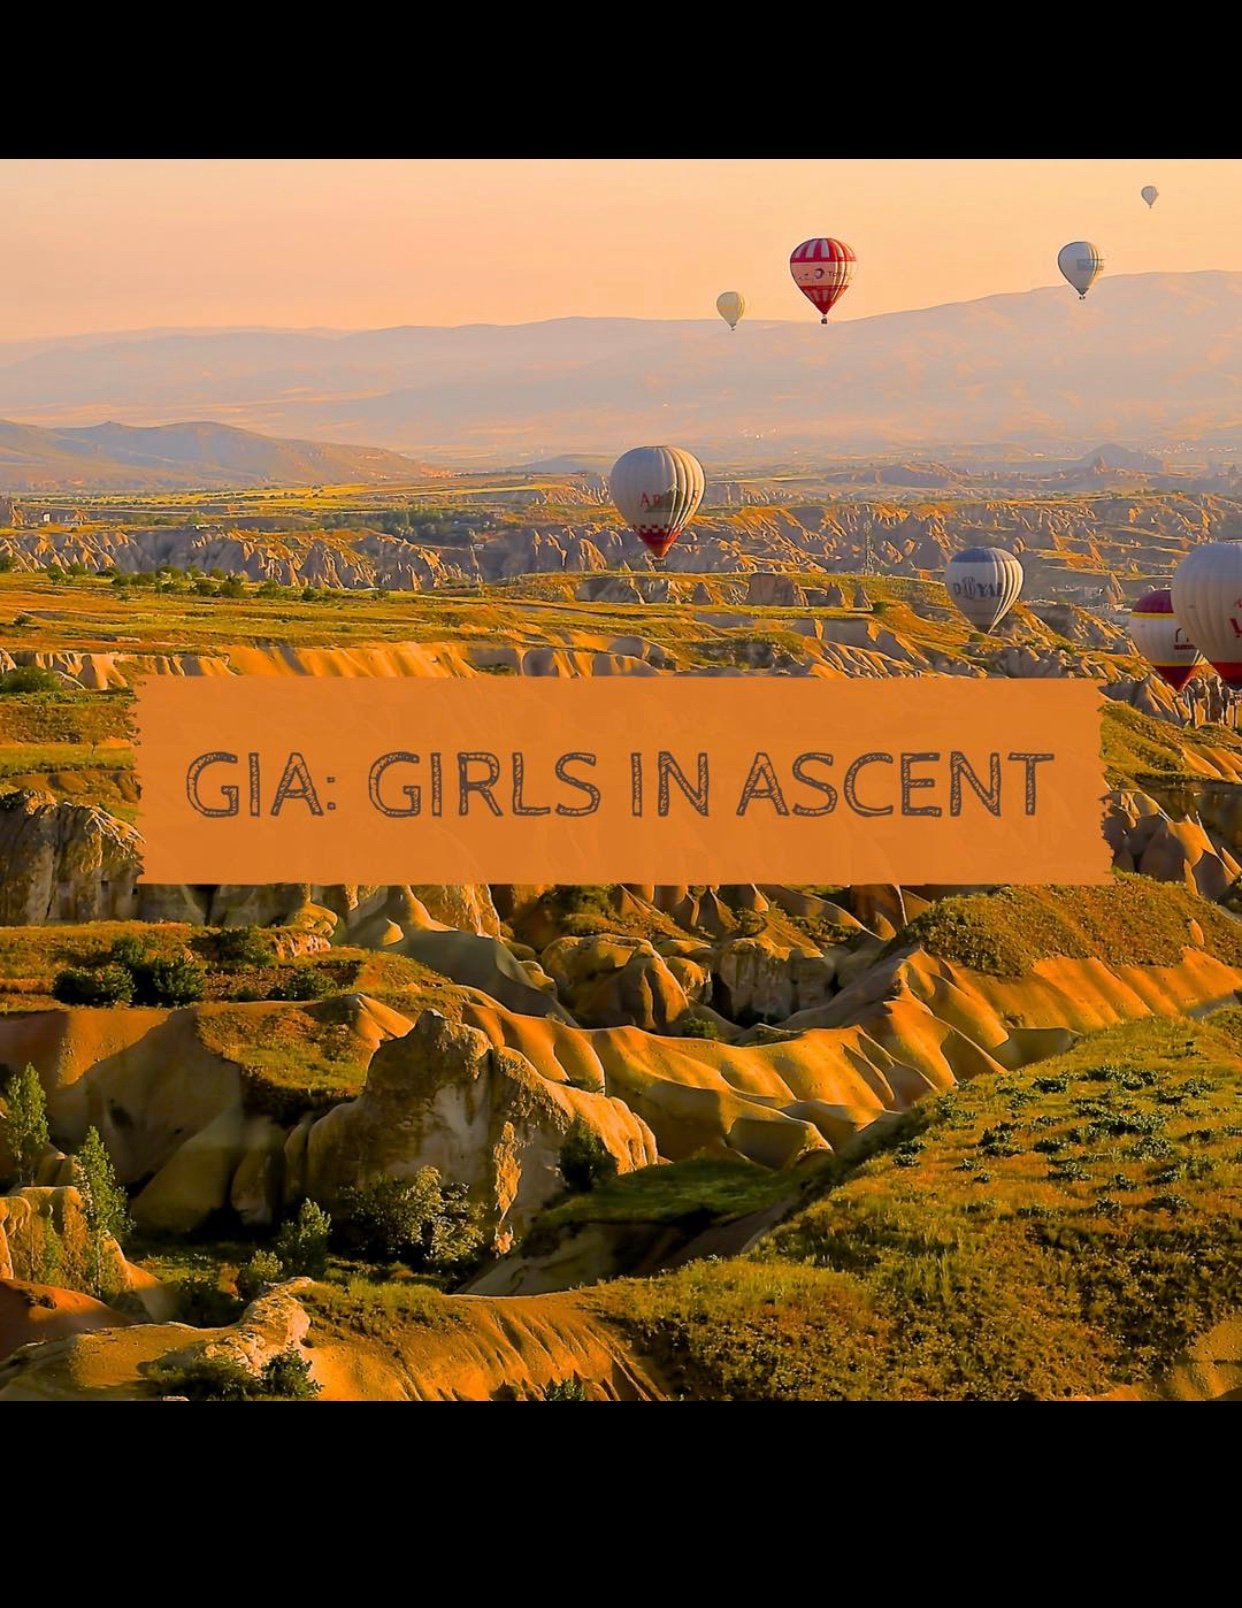 GIA: Girls In Action is a platform for women to uplift themselves and others. This page serves as the medium for empowering your dreams! You can succeed!